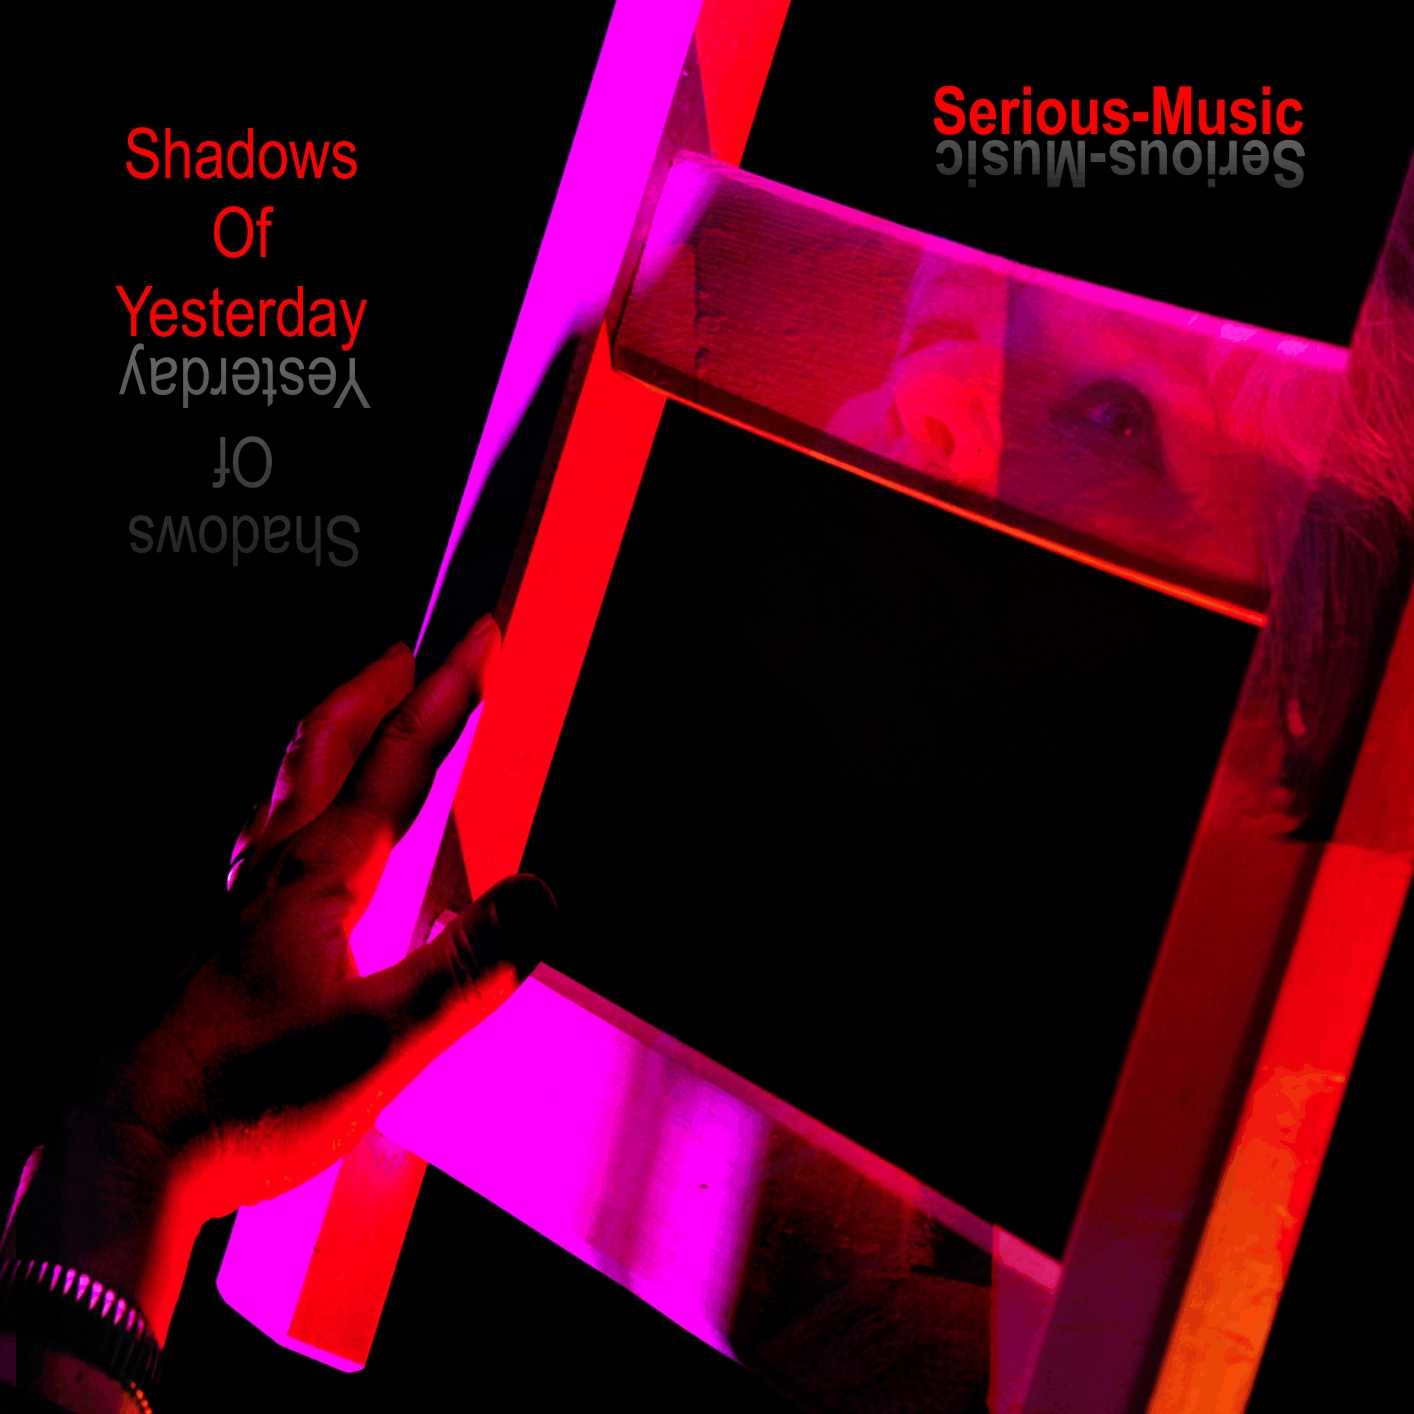 Shadows Of Yesterday feat. P.Dempsey, L.Sensi - Album SHADOWS OF YESTERDAY